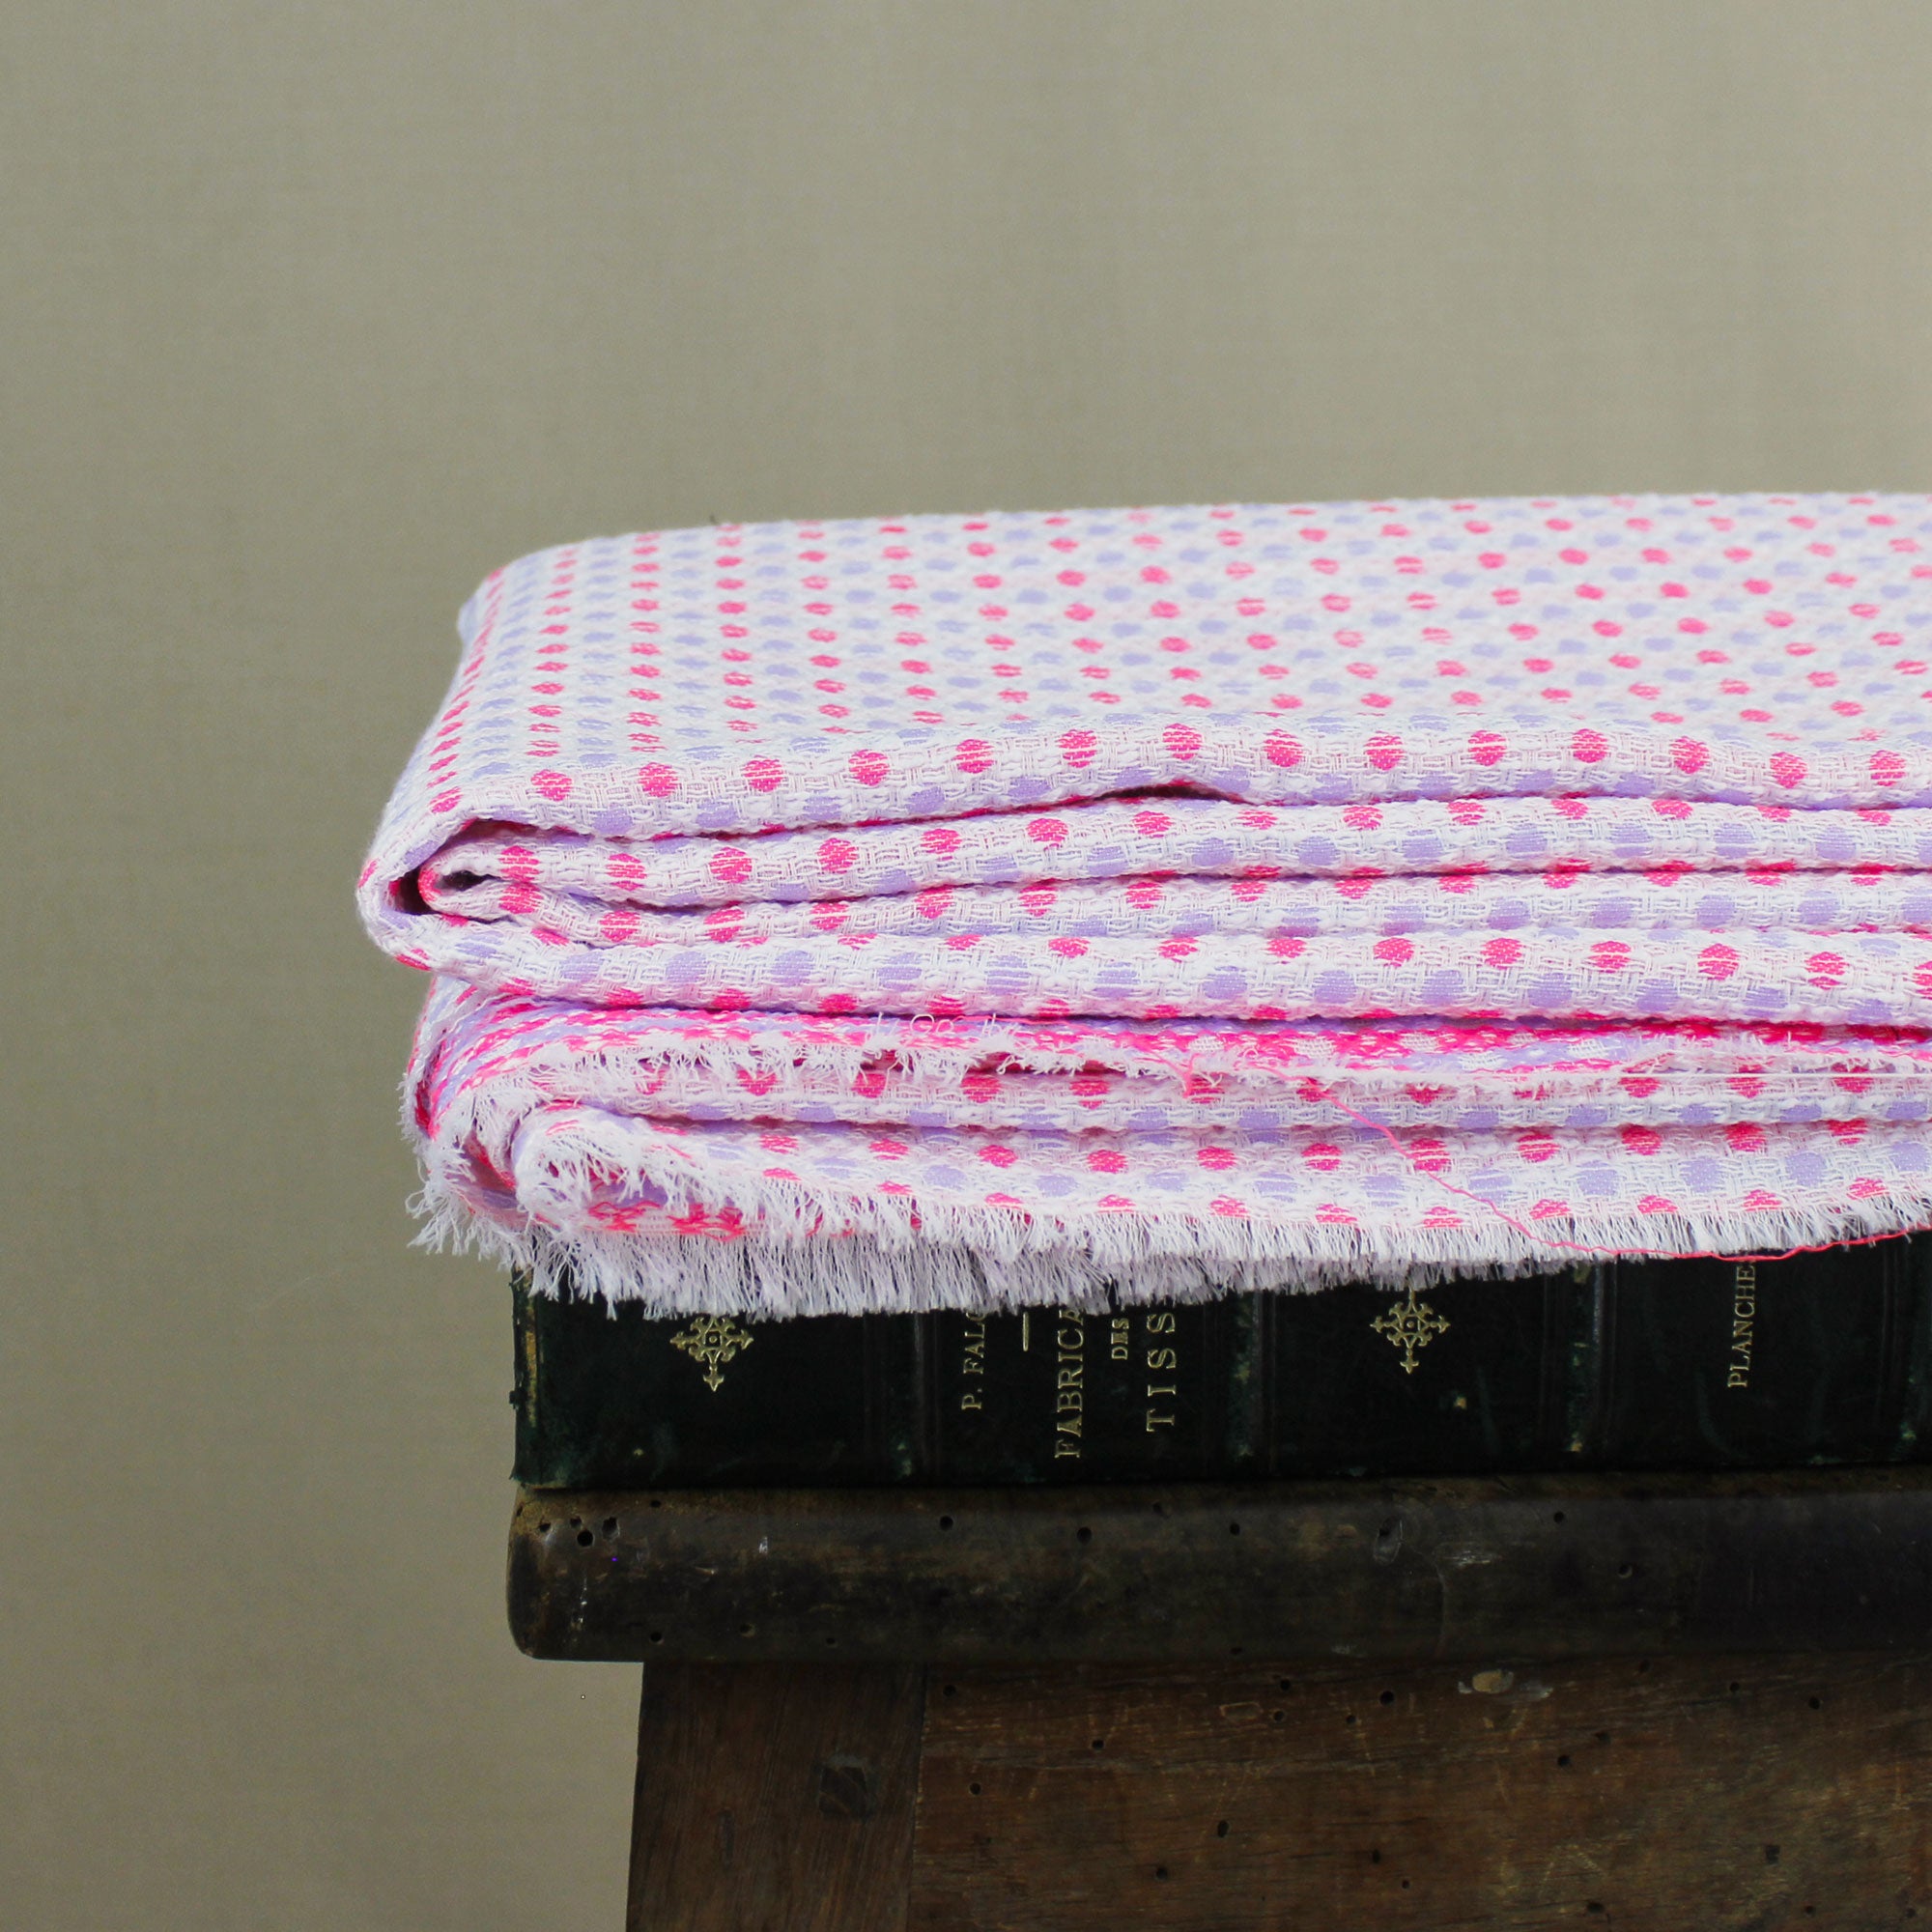 Cotton jacquard fabric with pink and parma polka dots